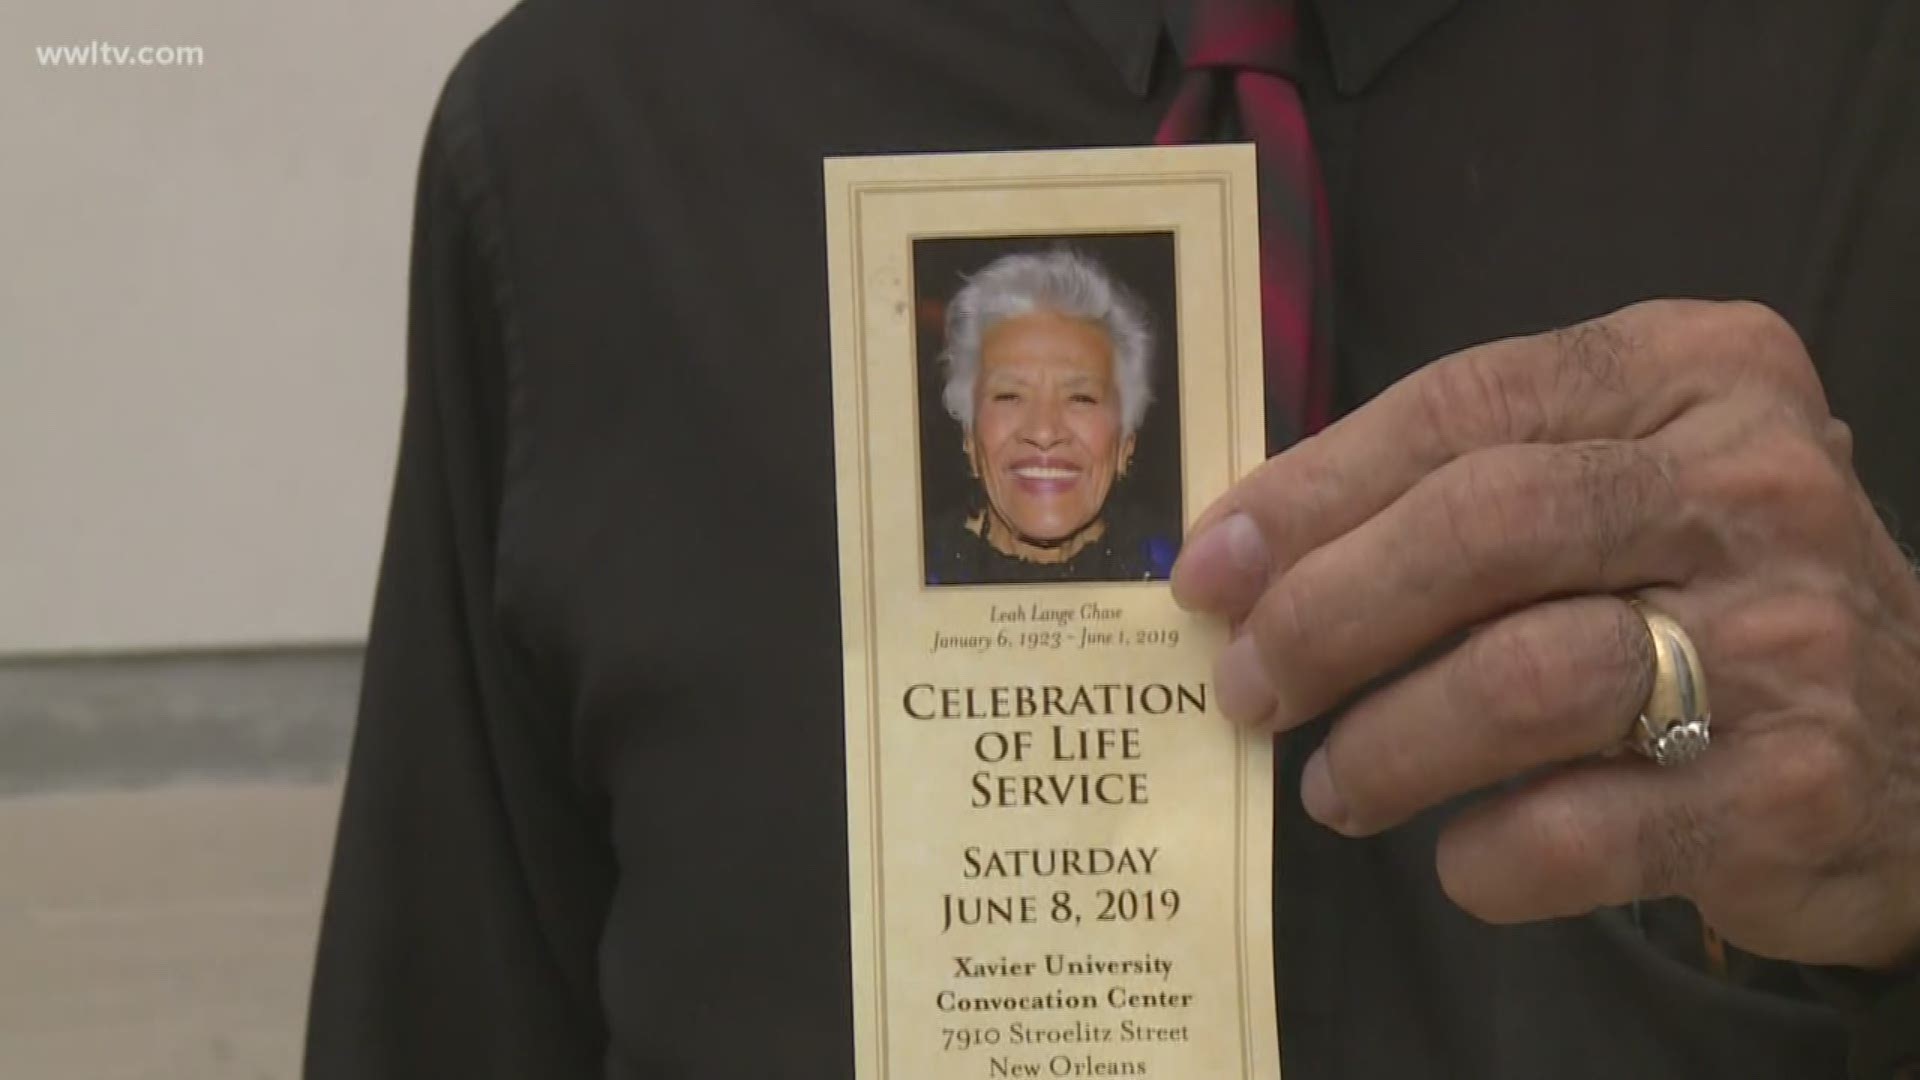 A celebration of New Orleans icon Leah Chase's life will be held at the Xavier University Convocation Center Saturday night at 6 p.m. The event is open to the public.